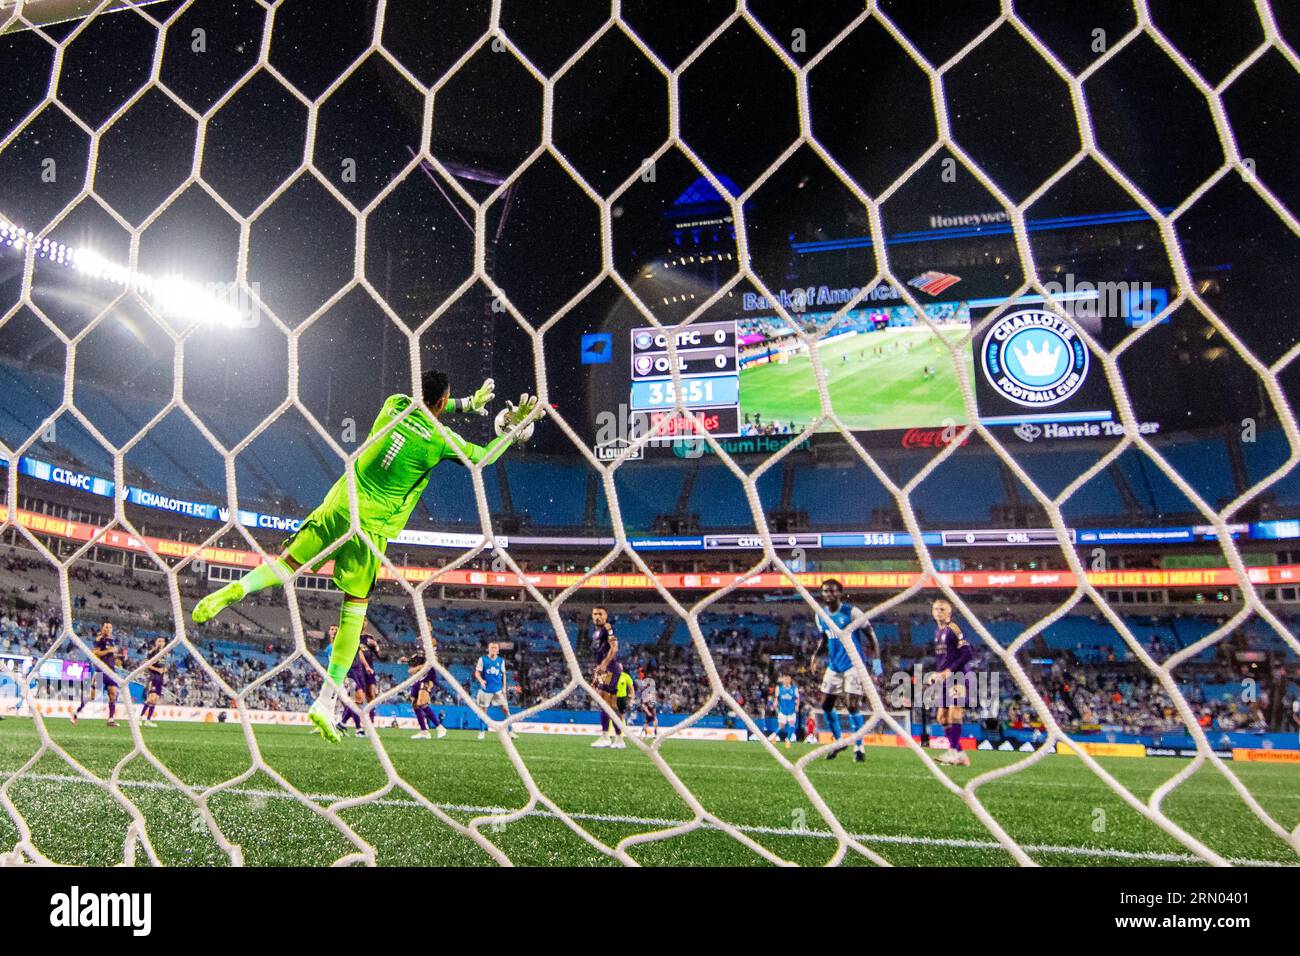 August 30, 2023: Orlando City goalkeeper Pedro Gallese (1) makes the save against the Charlotte FC during the first half of the Major League Soccer match up at Bank of America Stadium in Charlotte, NC. (Scott KinserCal Sport Media) Stock Photo